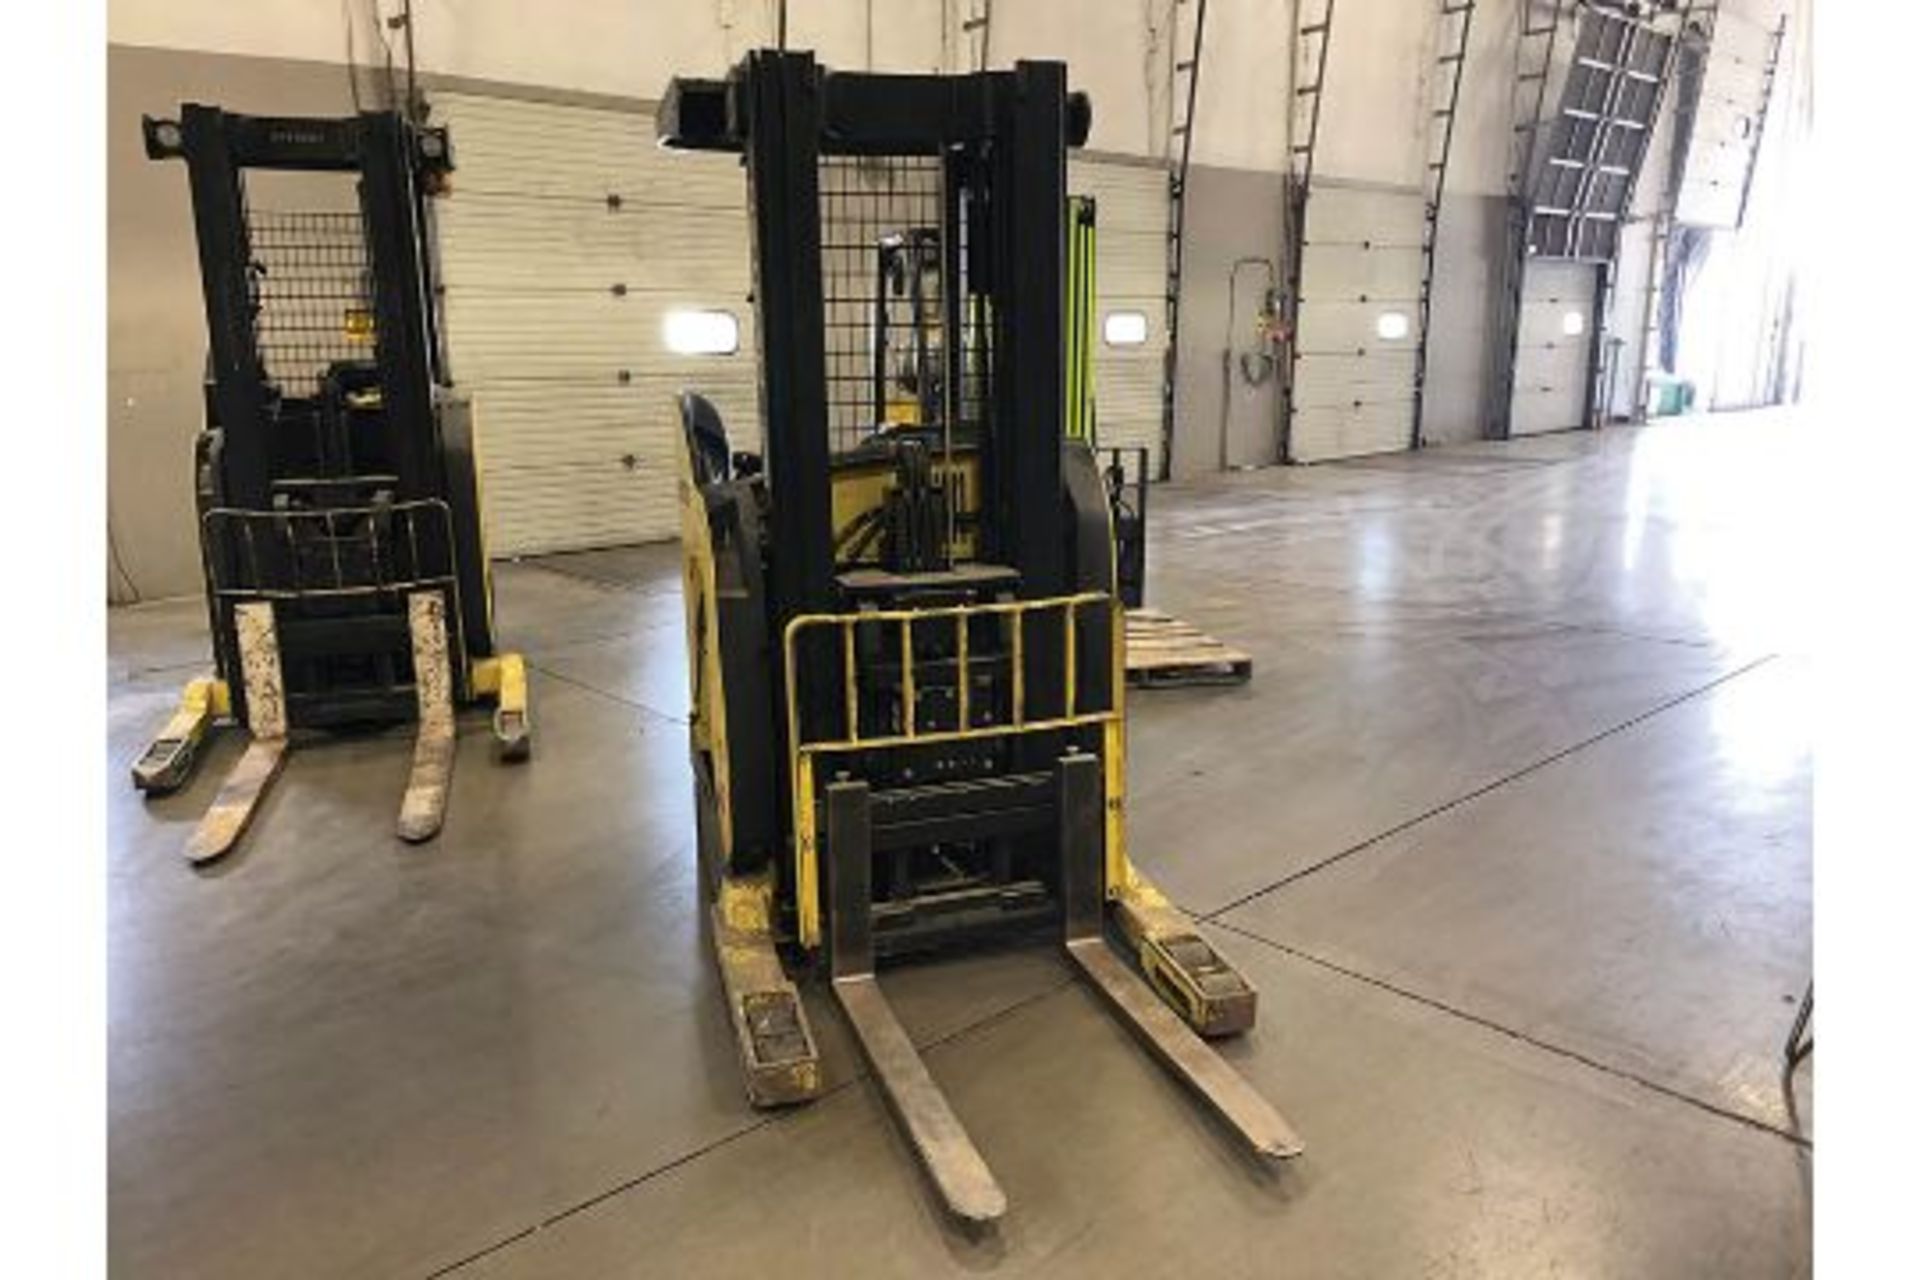 2010 HYSTER 4000 LB REACH TRUCK MODEL N402R-16.5, S/N D4 70-02454H, THREE STAGE MAST, 191'' LIFT - Image 2 of 4